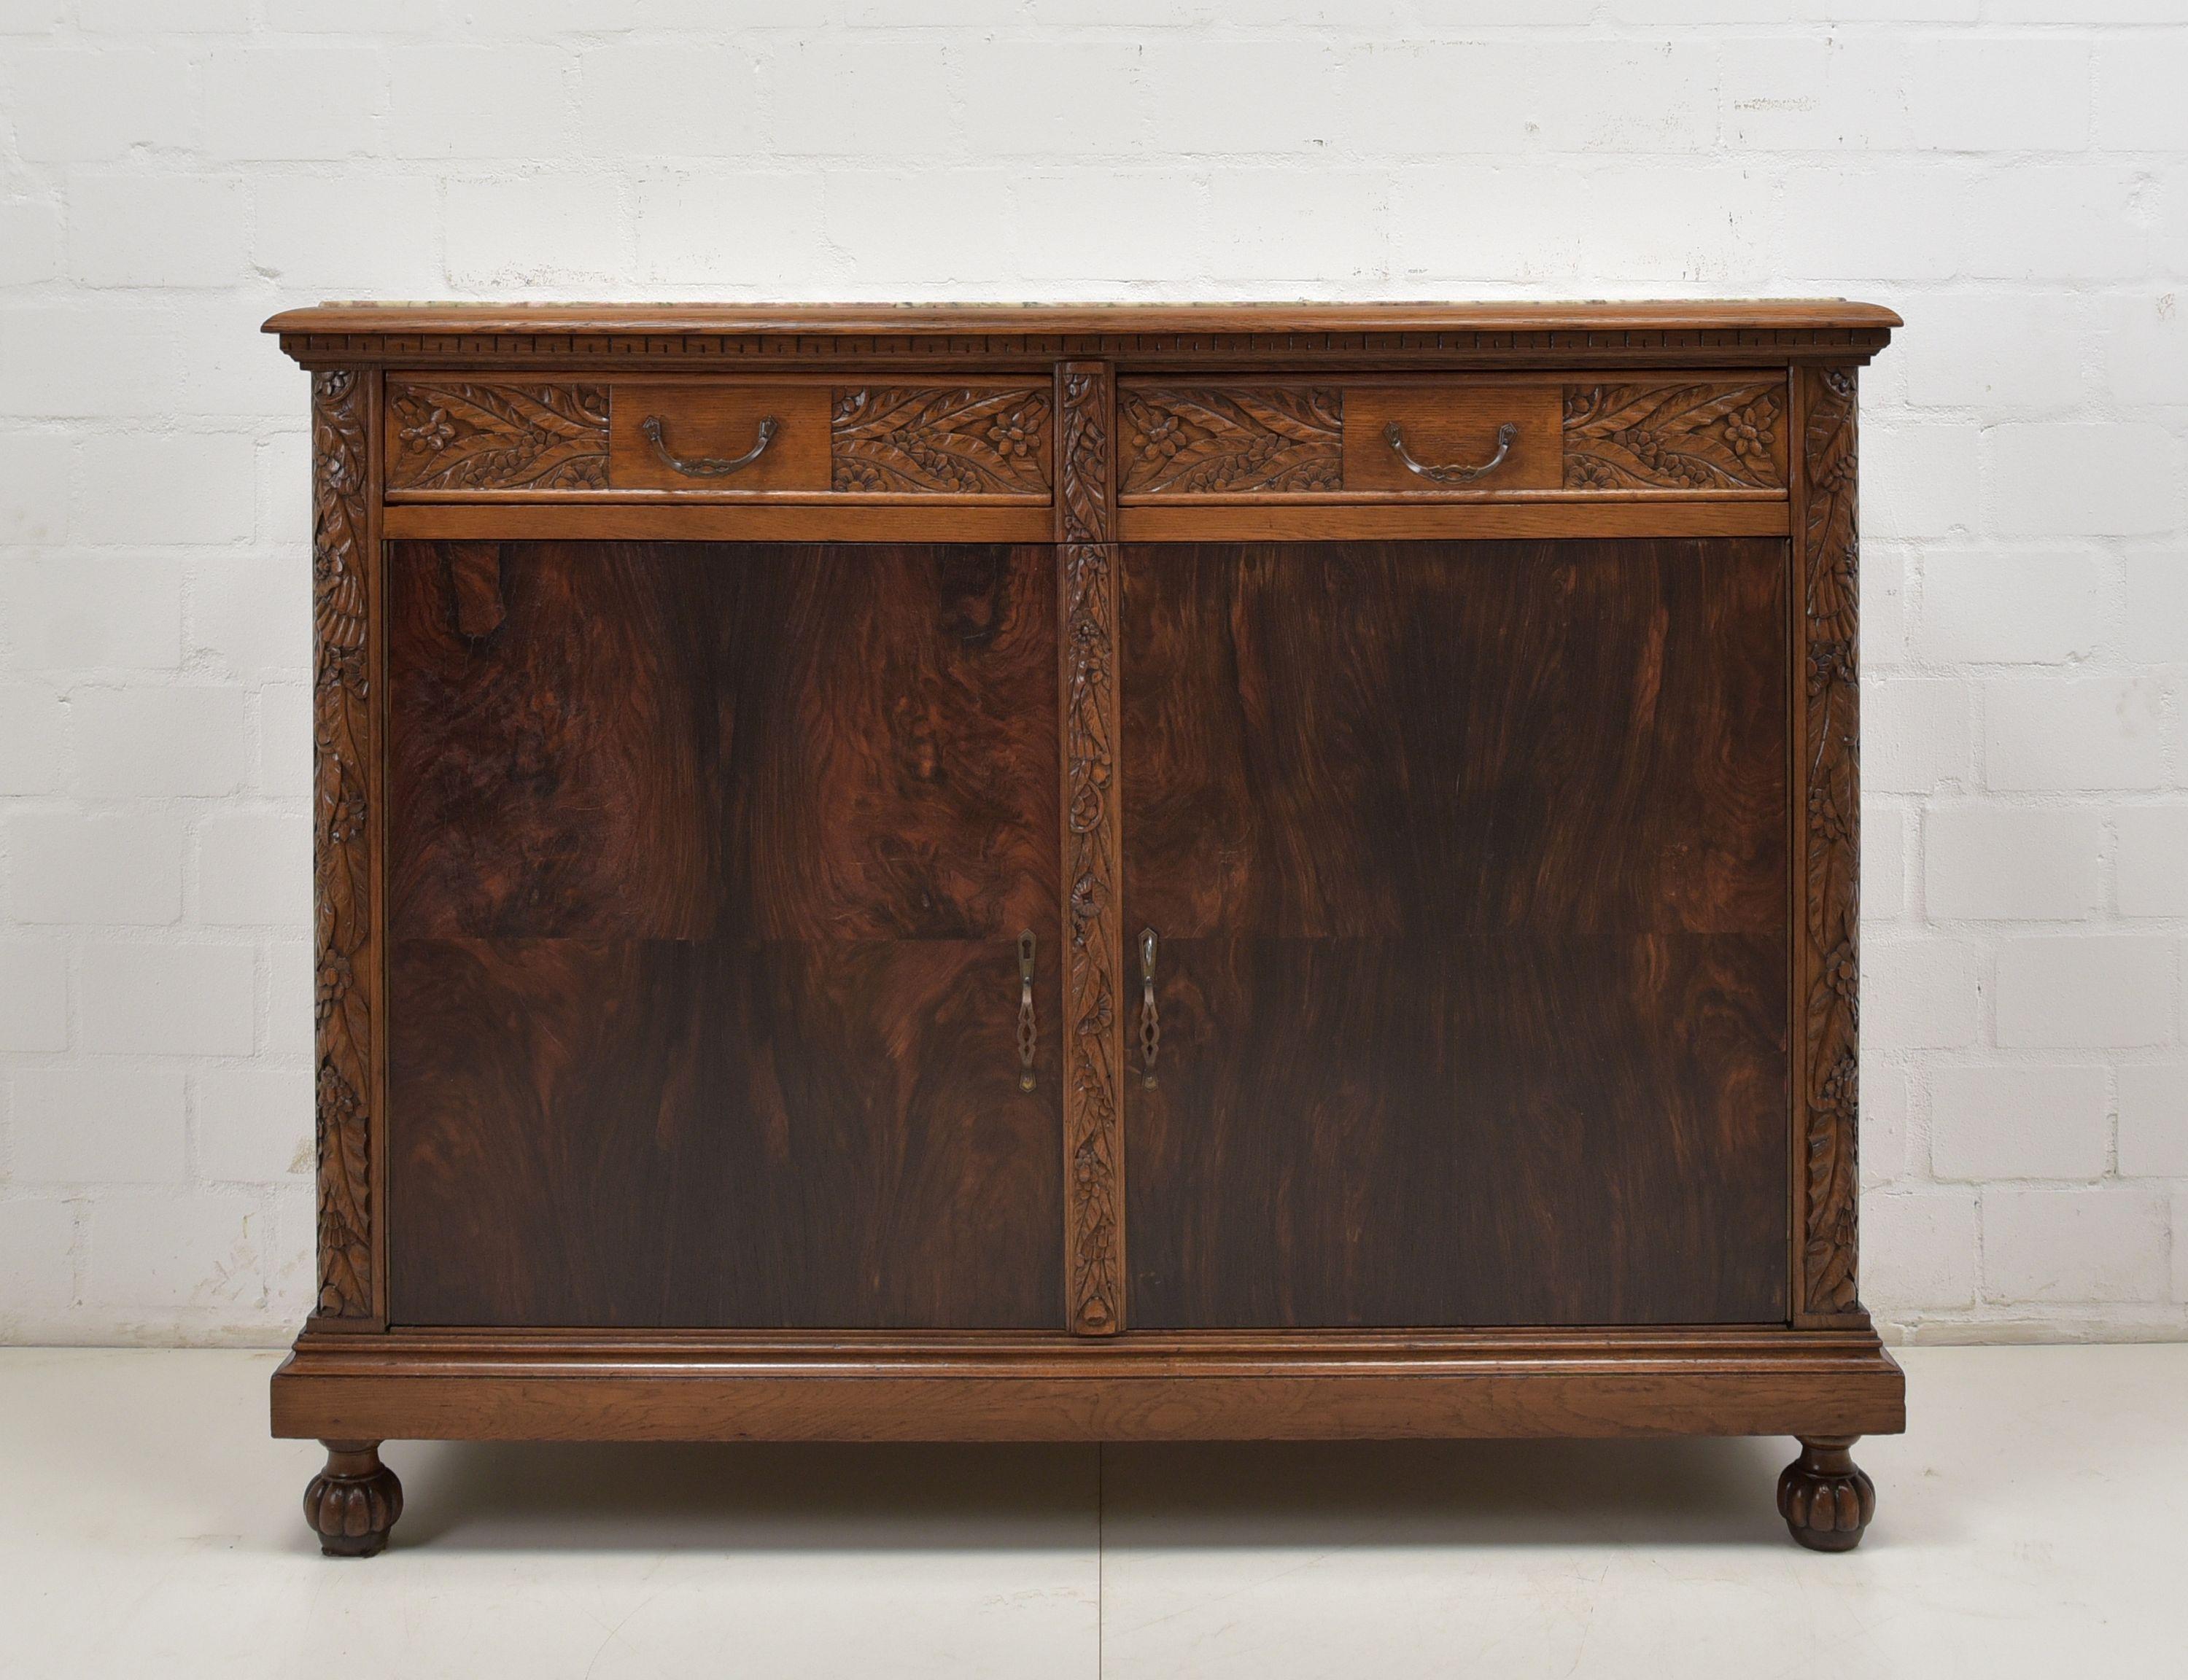 Sideboard restored Art Deco circa 1930 oak rosewood chest of drawers

Features:
Two-door model with 2 drawers and marble top
Solid oak shelf
High quality
Drawers pronged
Original stone slab, was once broken
Original fittings
Abstract